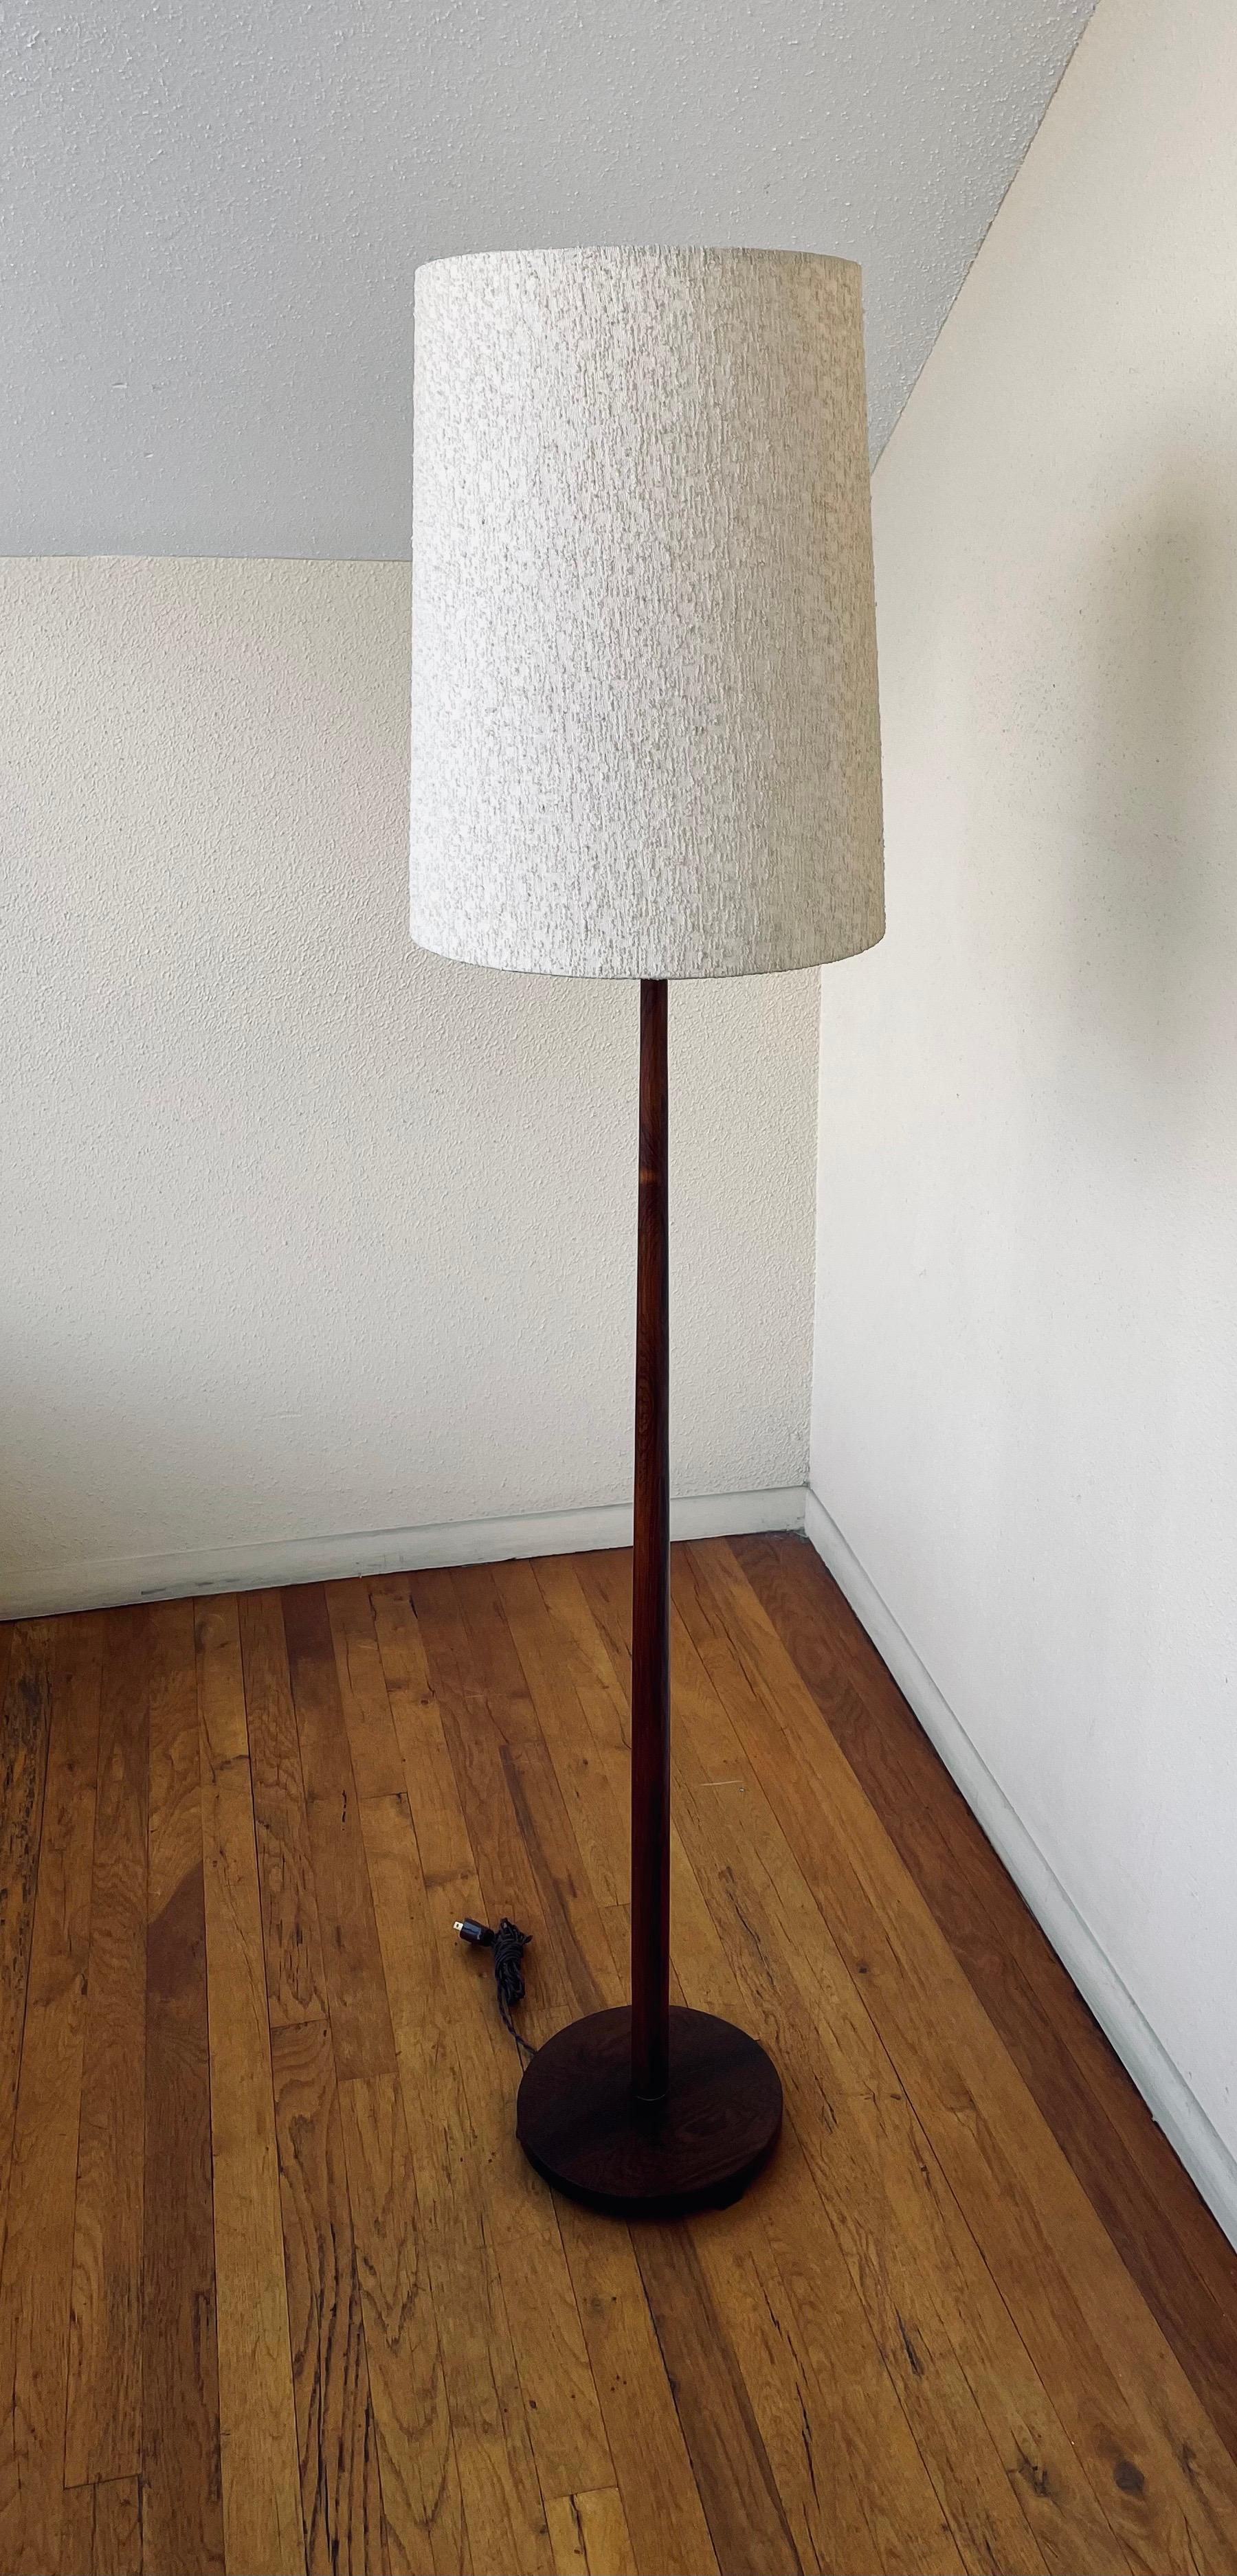 A beautiful and rare solid rosewood floor lamp, excellent condition freshly refinished and rewired with a new cloth cord., made in Sweden, and perfect working condition. The lampshade is not included due to shipping expenses it's not worth shipping